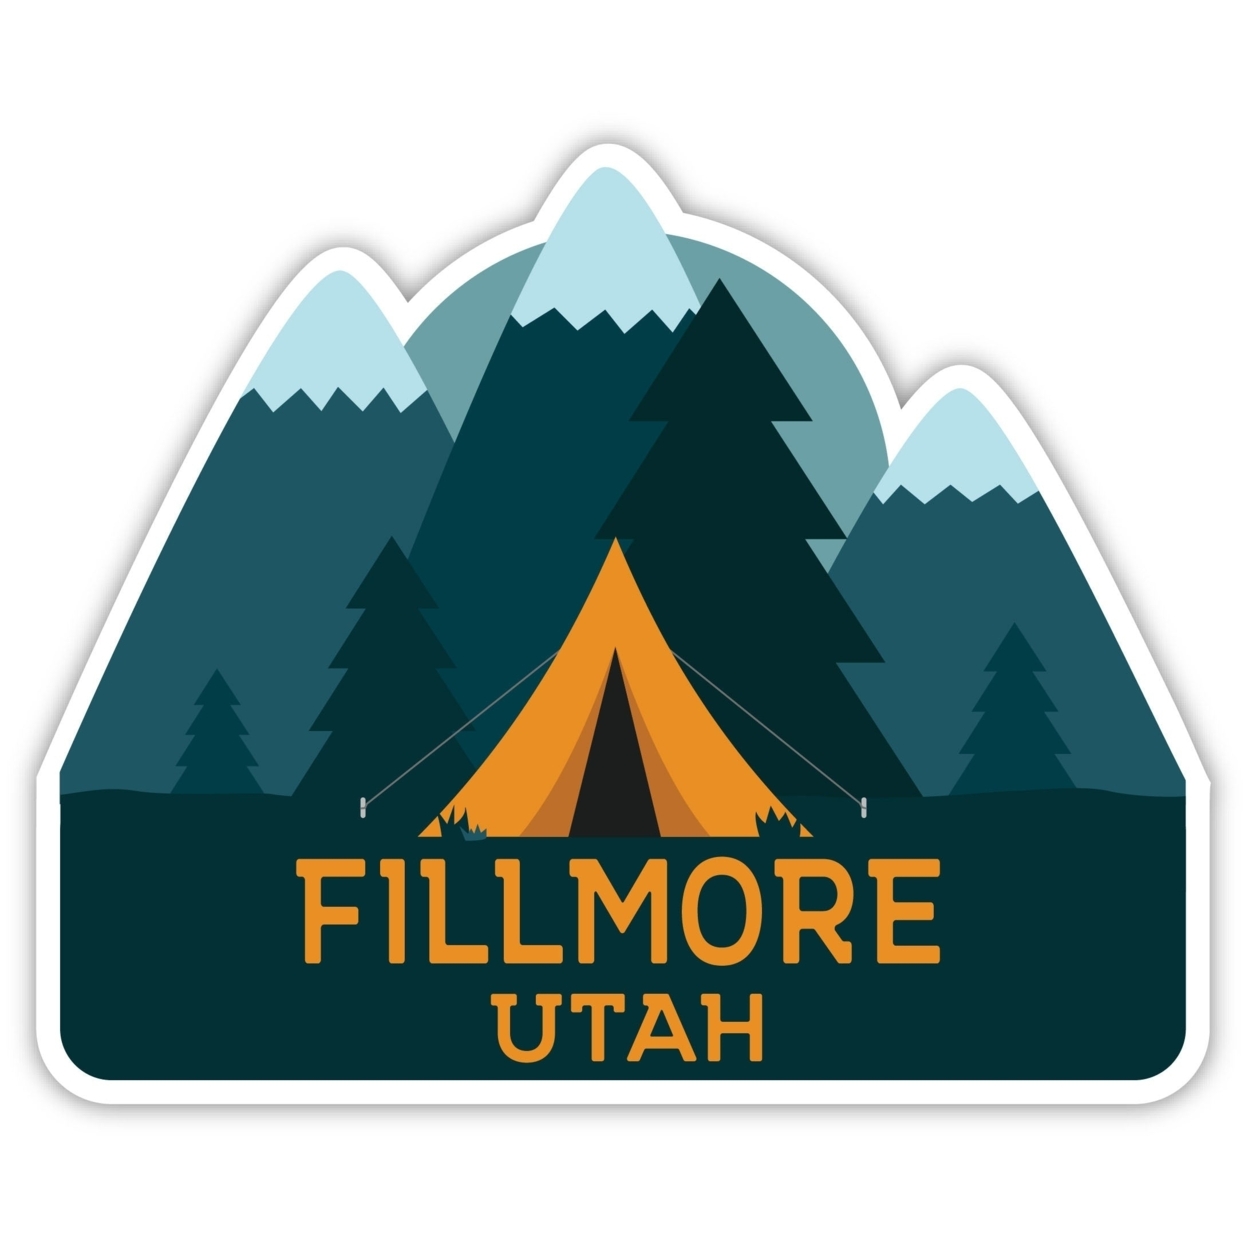 Fillmore Utah Souvenir Decorative Stickers (Choose Theme And Size) - 4-Pack, 4-Inch, Tent